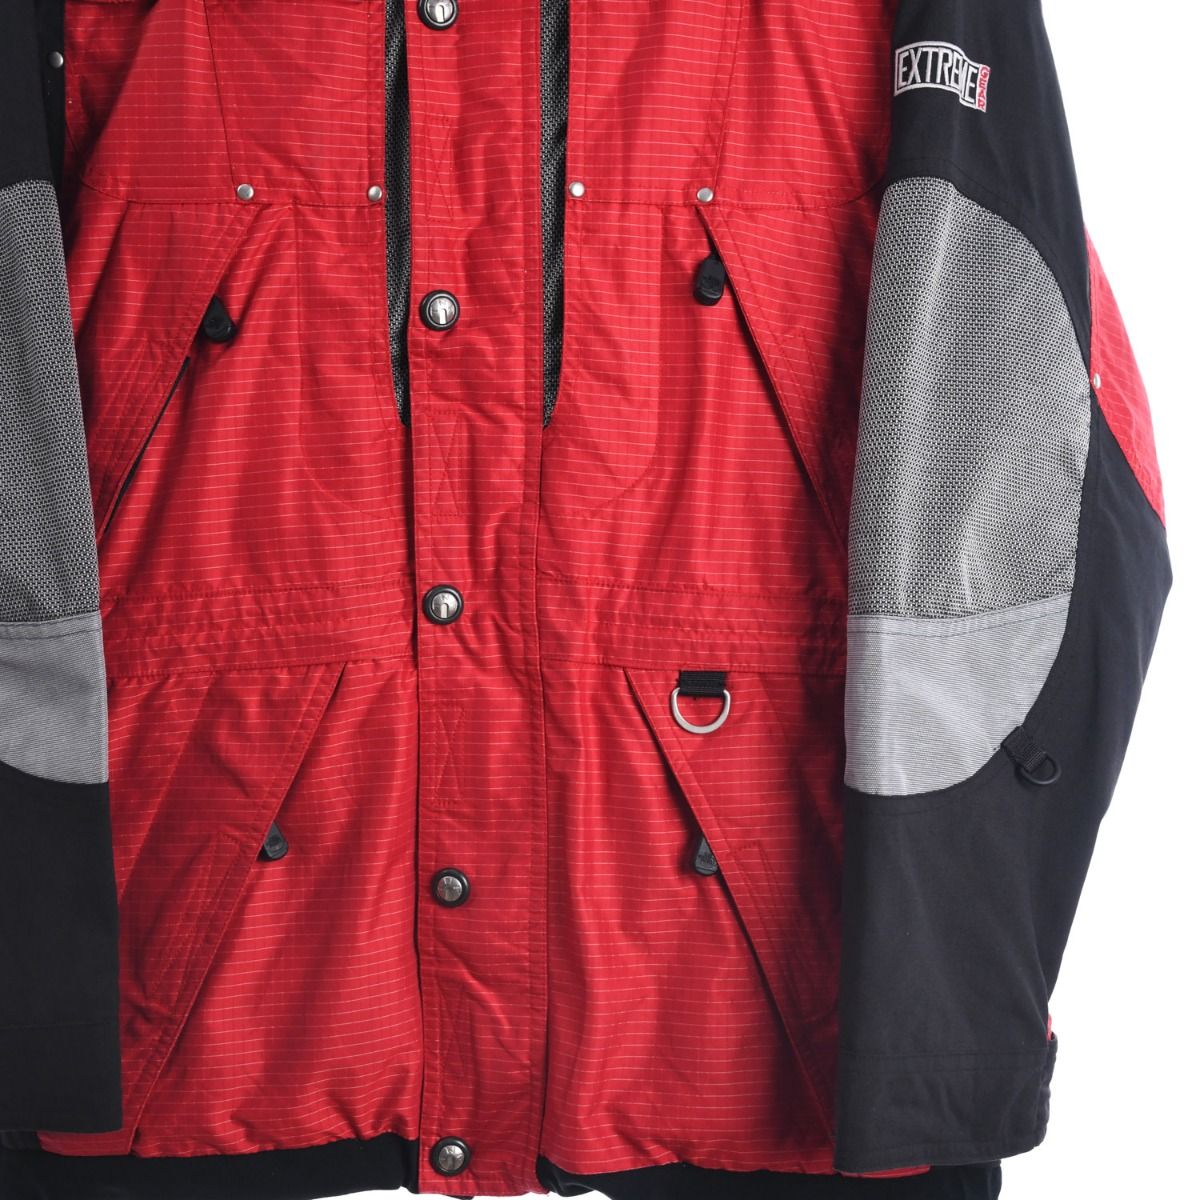 The North Face Extreme Gear Jacket